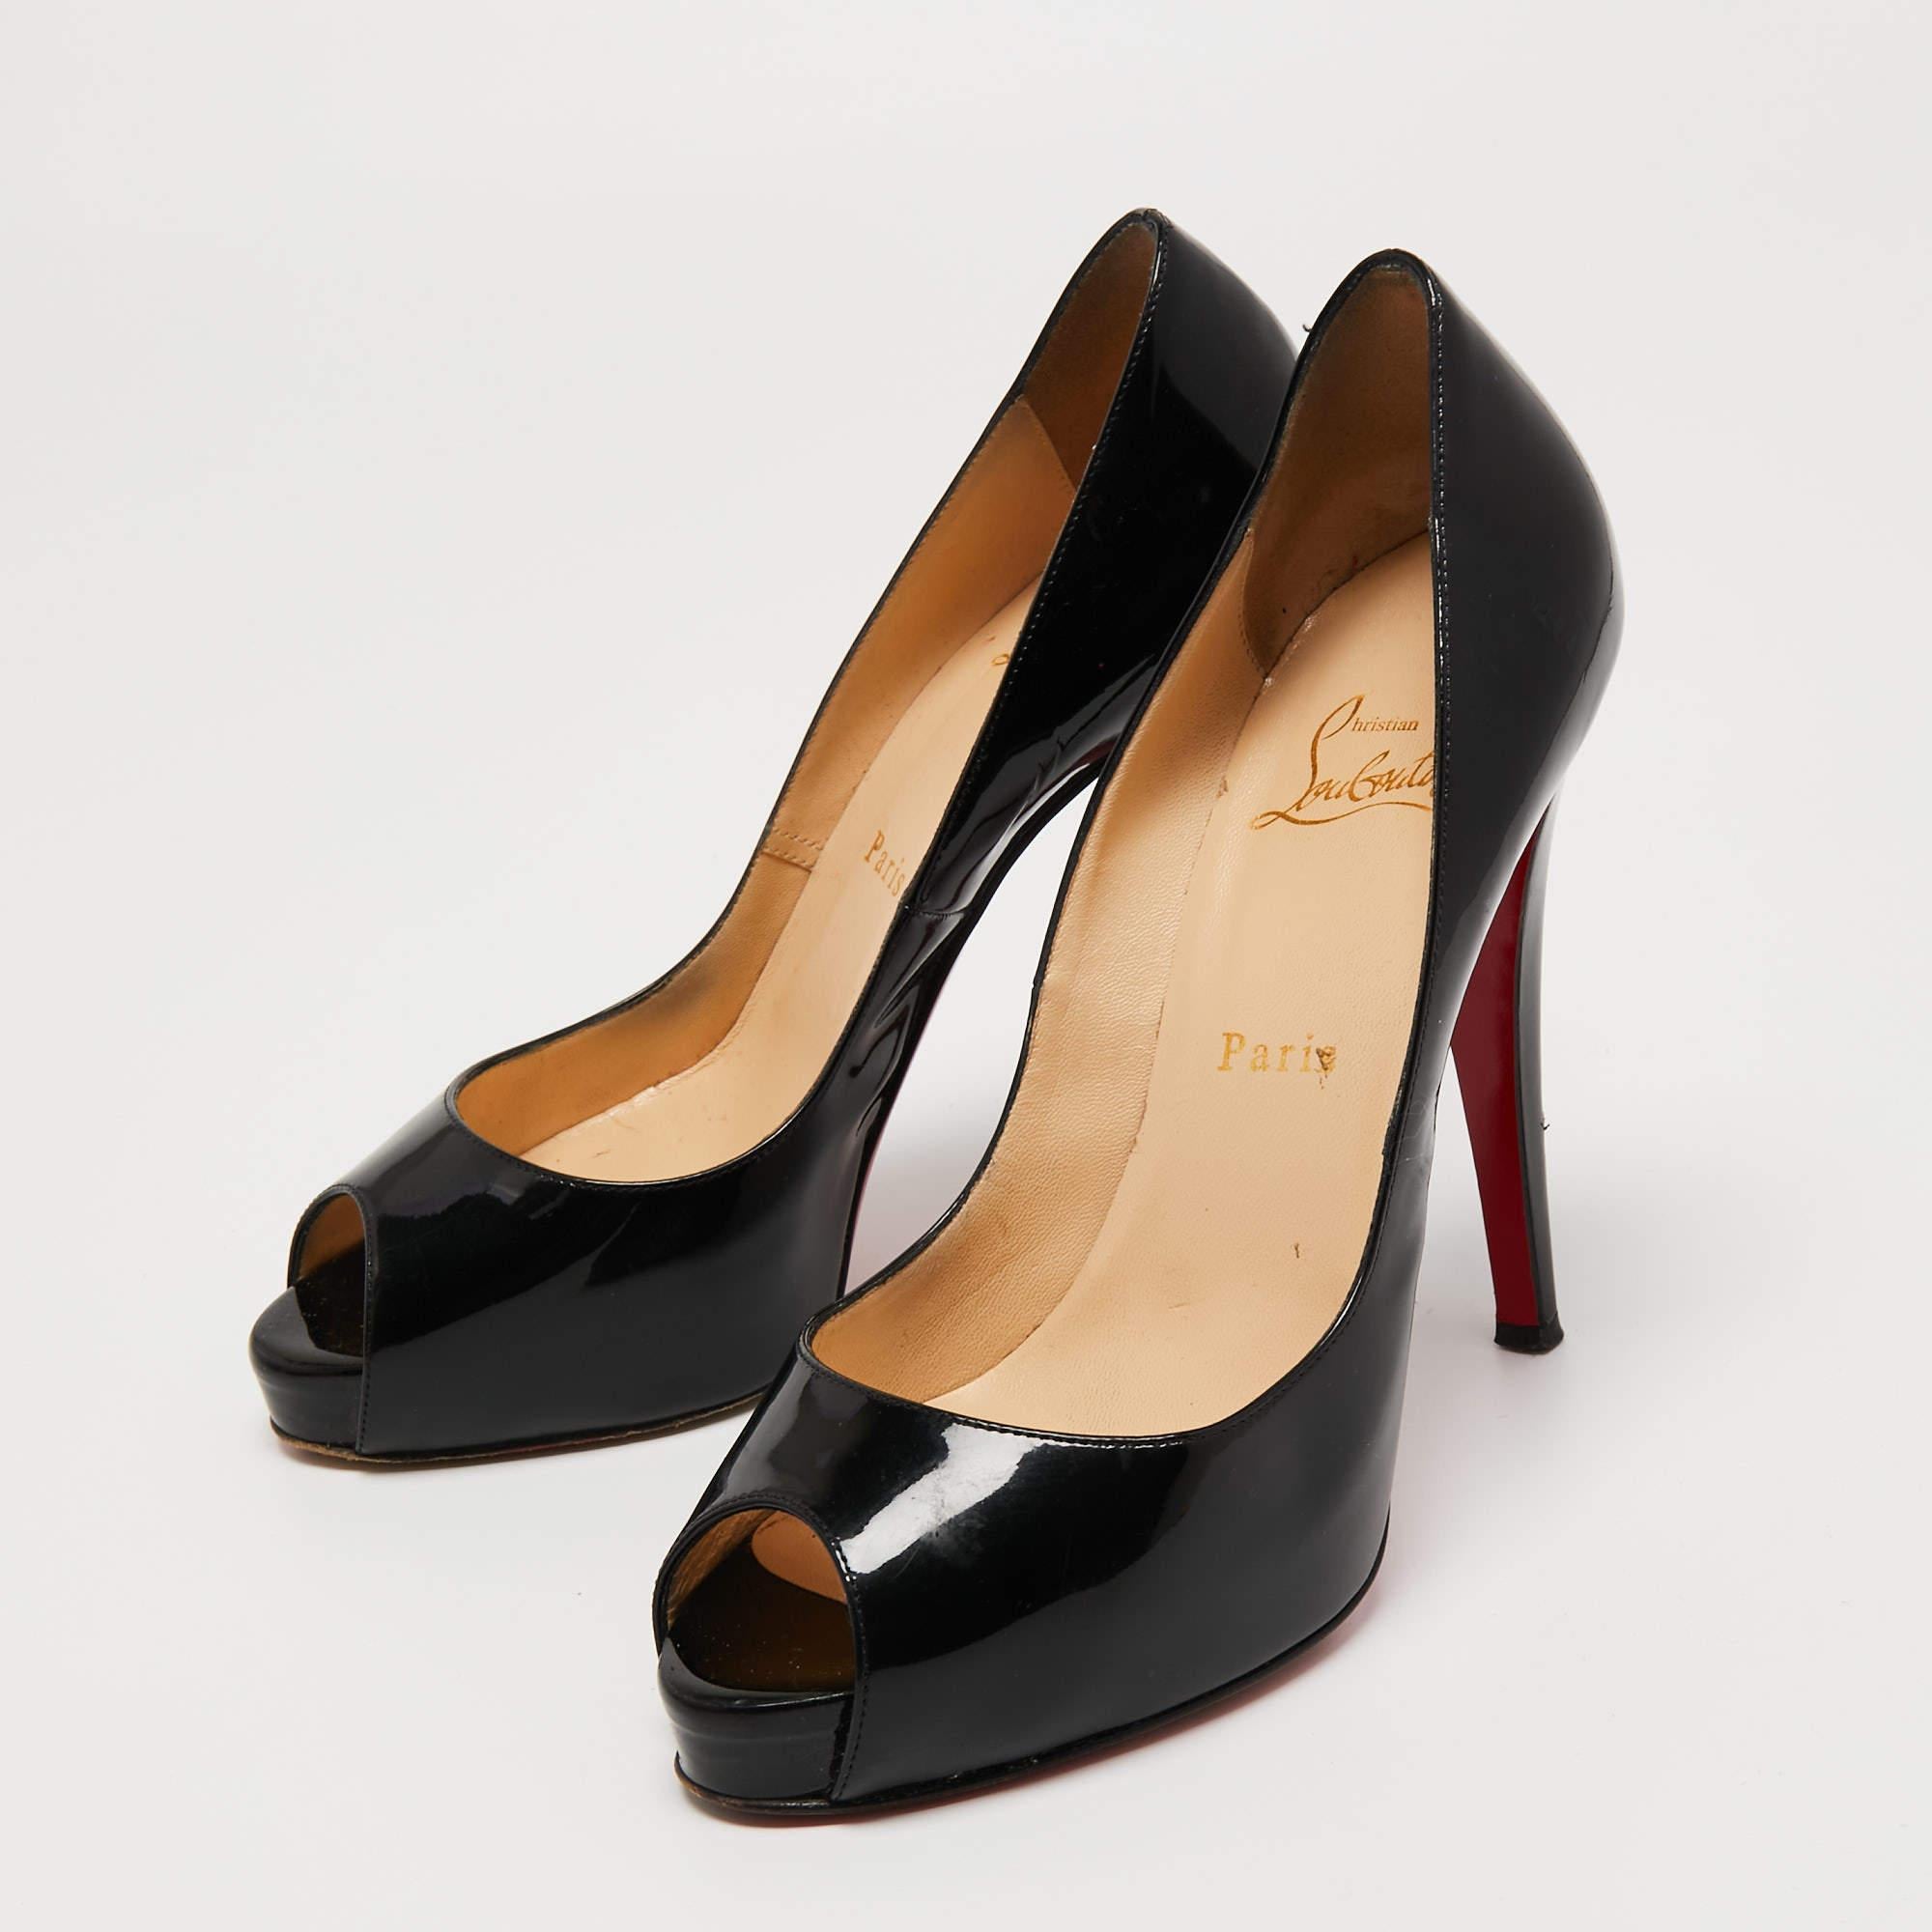 Christian Louboutin Black Patent Leather New Very Prive Pumps Size 38 For Sale 2